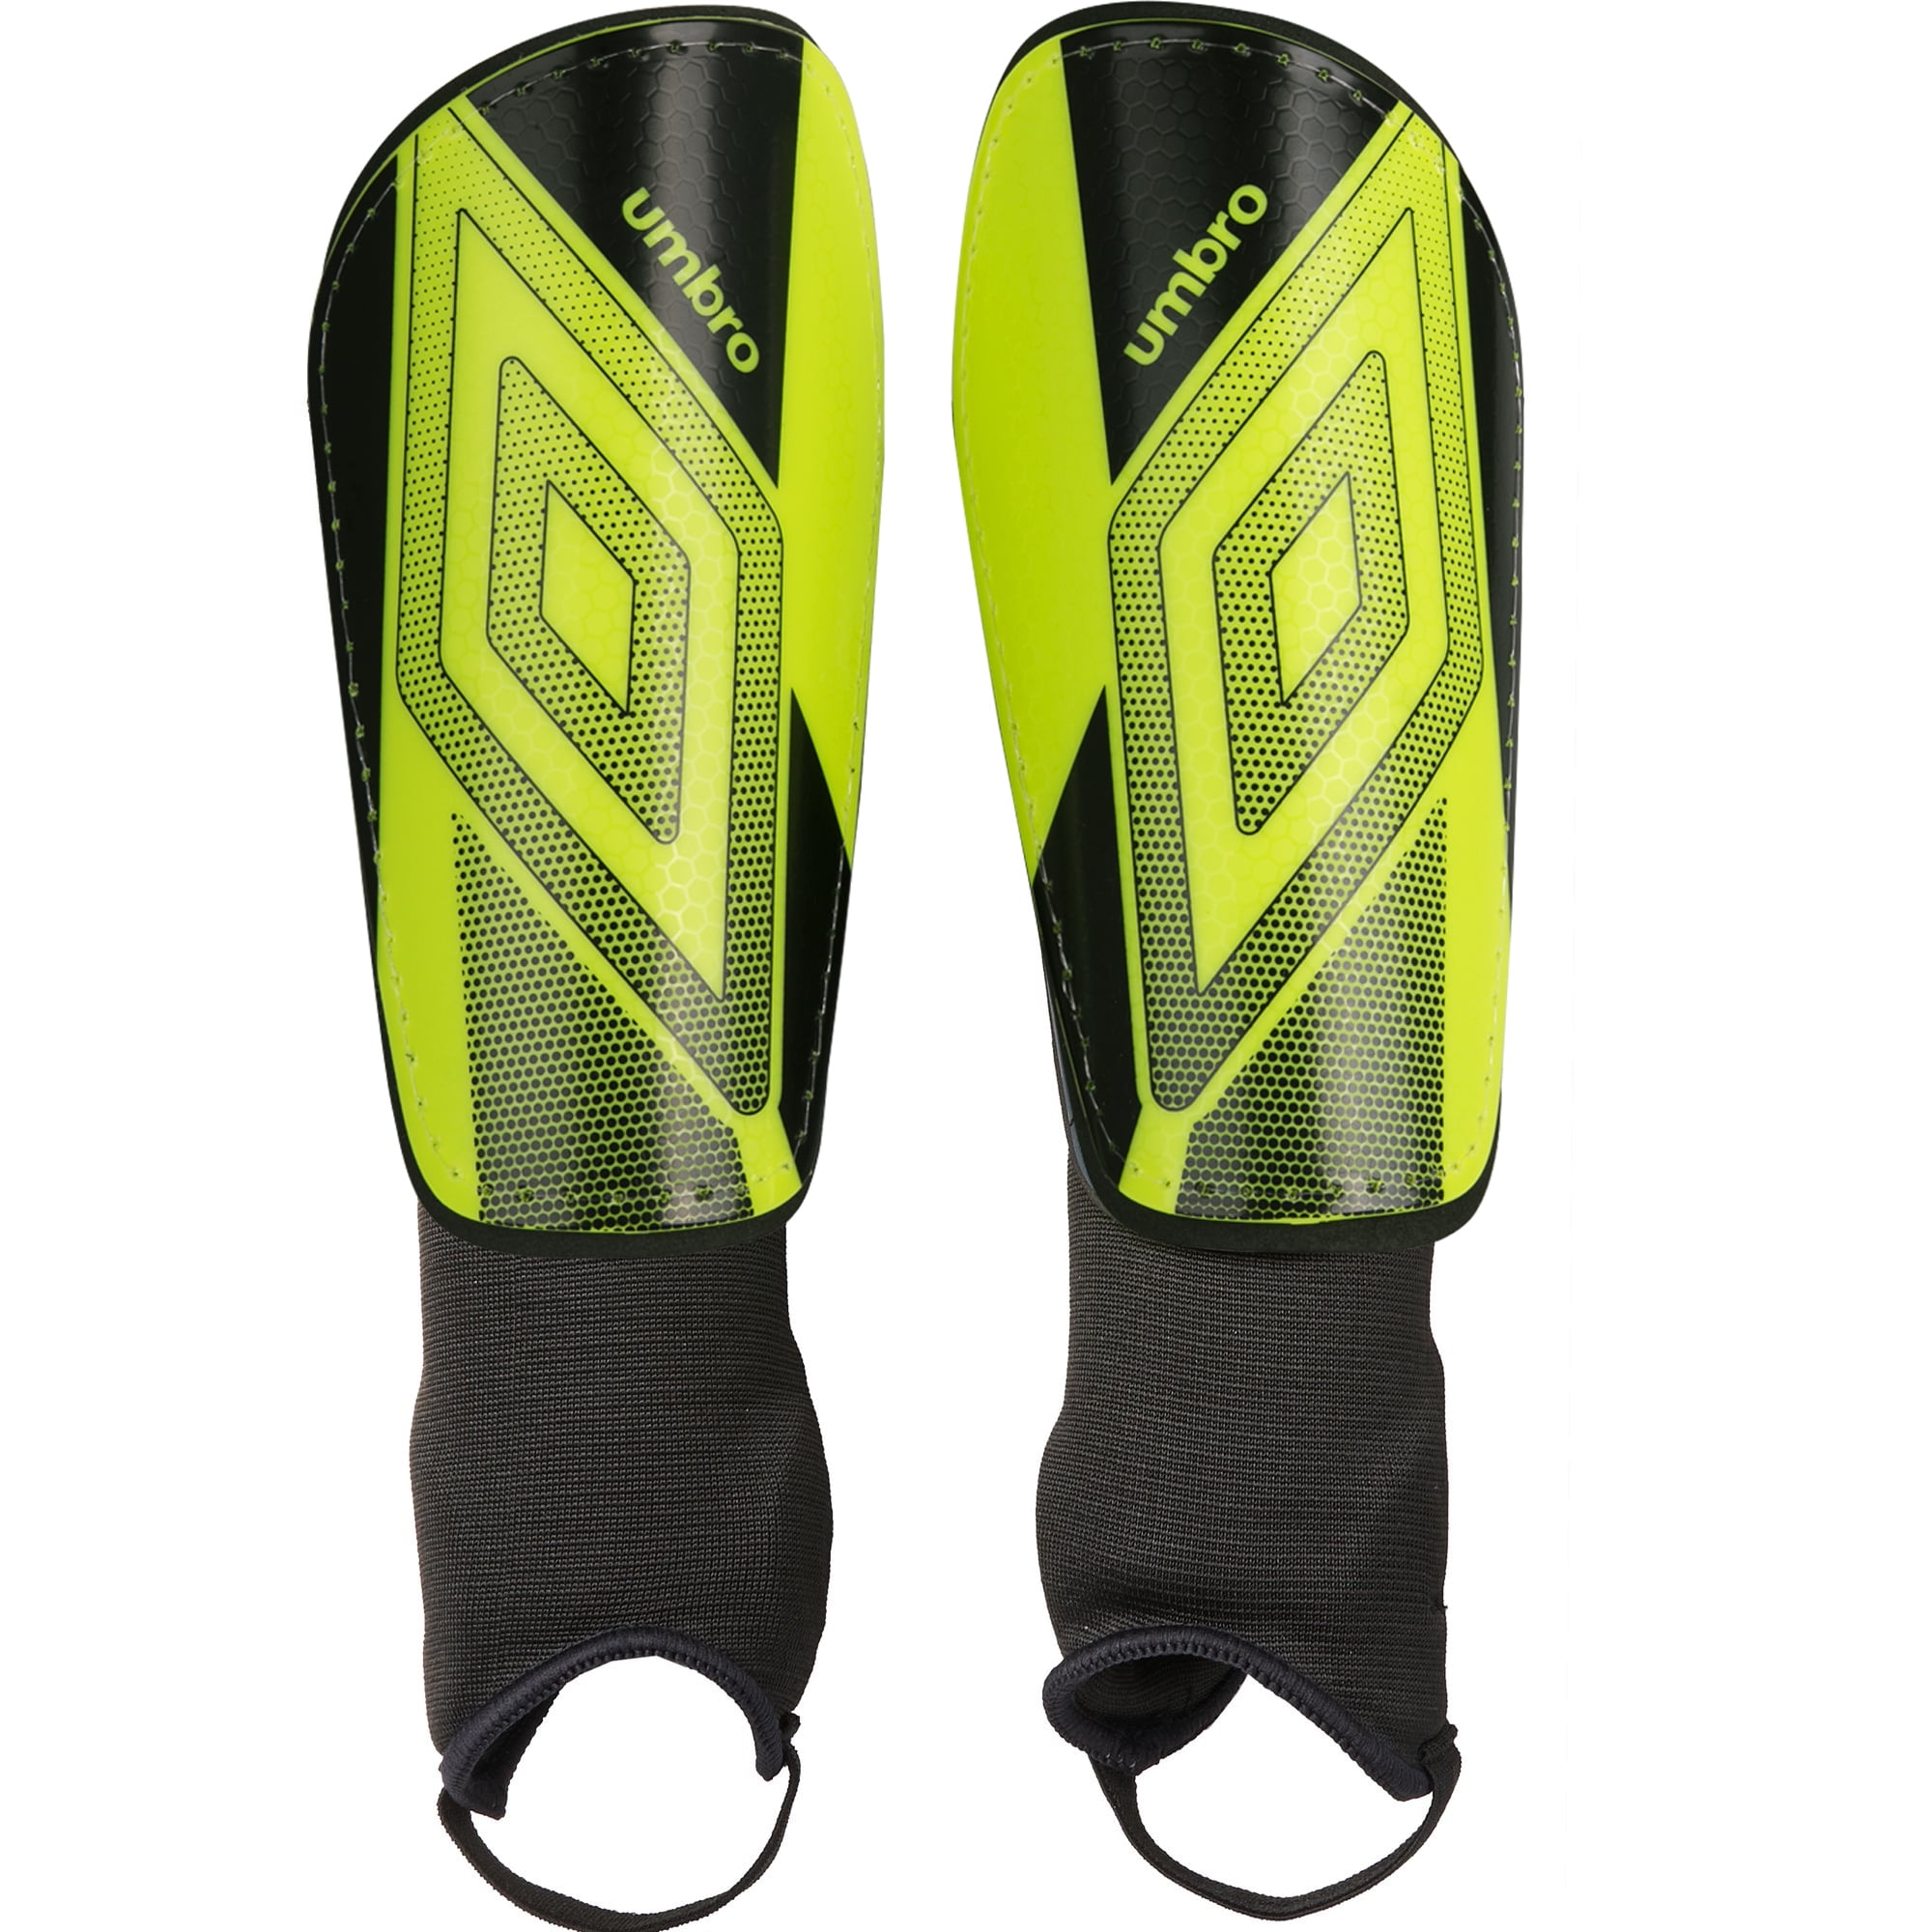 Umbro Ceramica Peewee Stirrup Soccer Shin Guards for Kids, Bright Yellow 